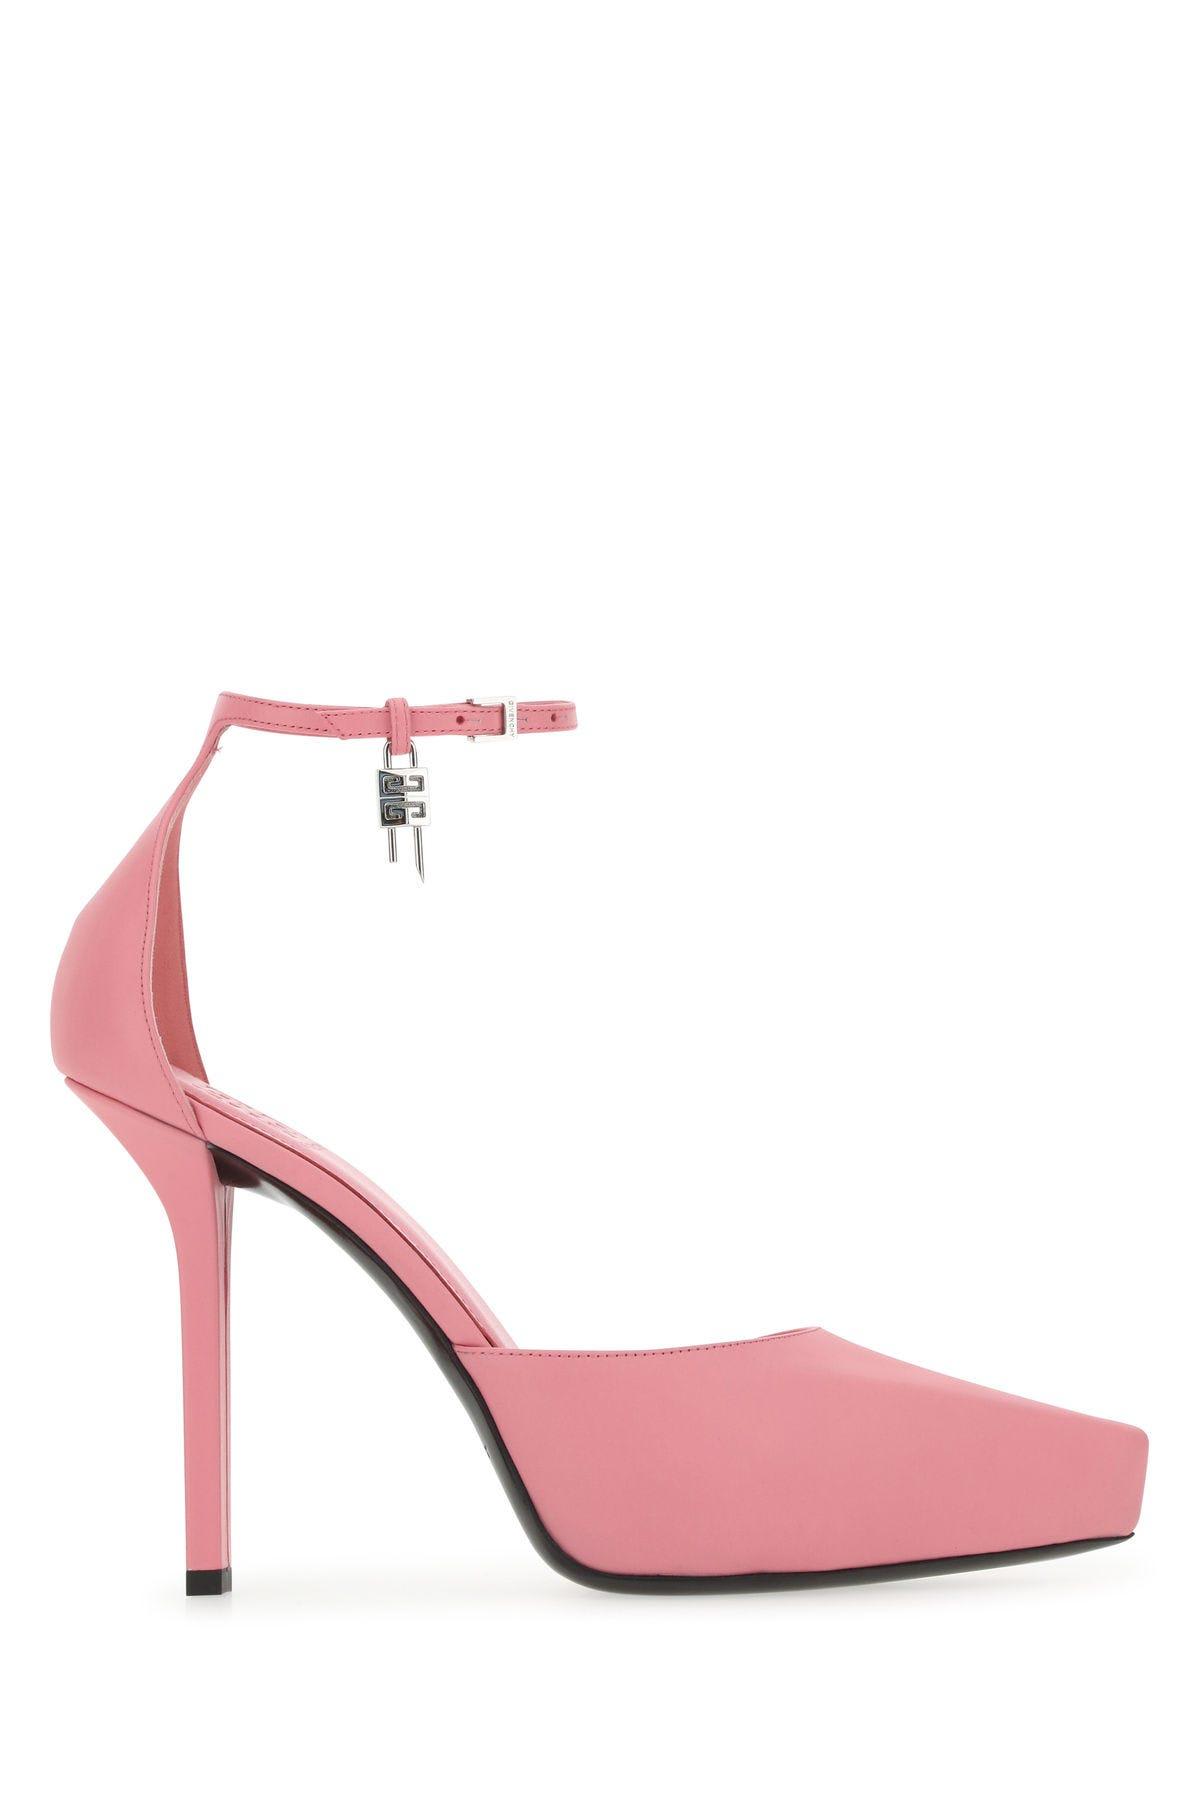 Shop Givenchy Pink Leather G-lock Pumps